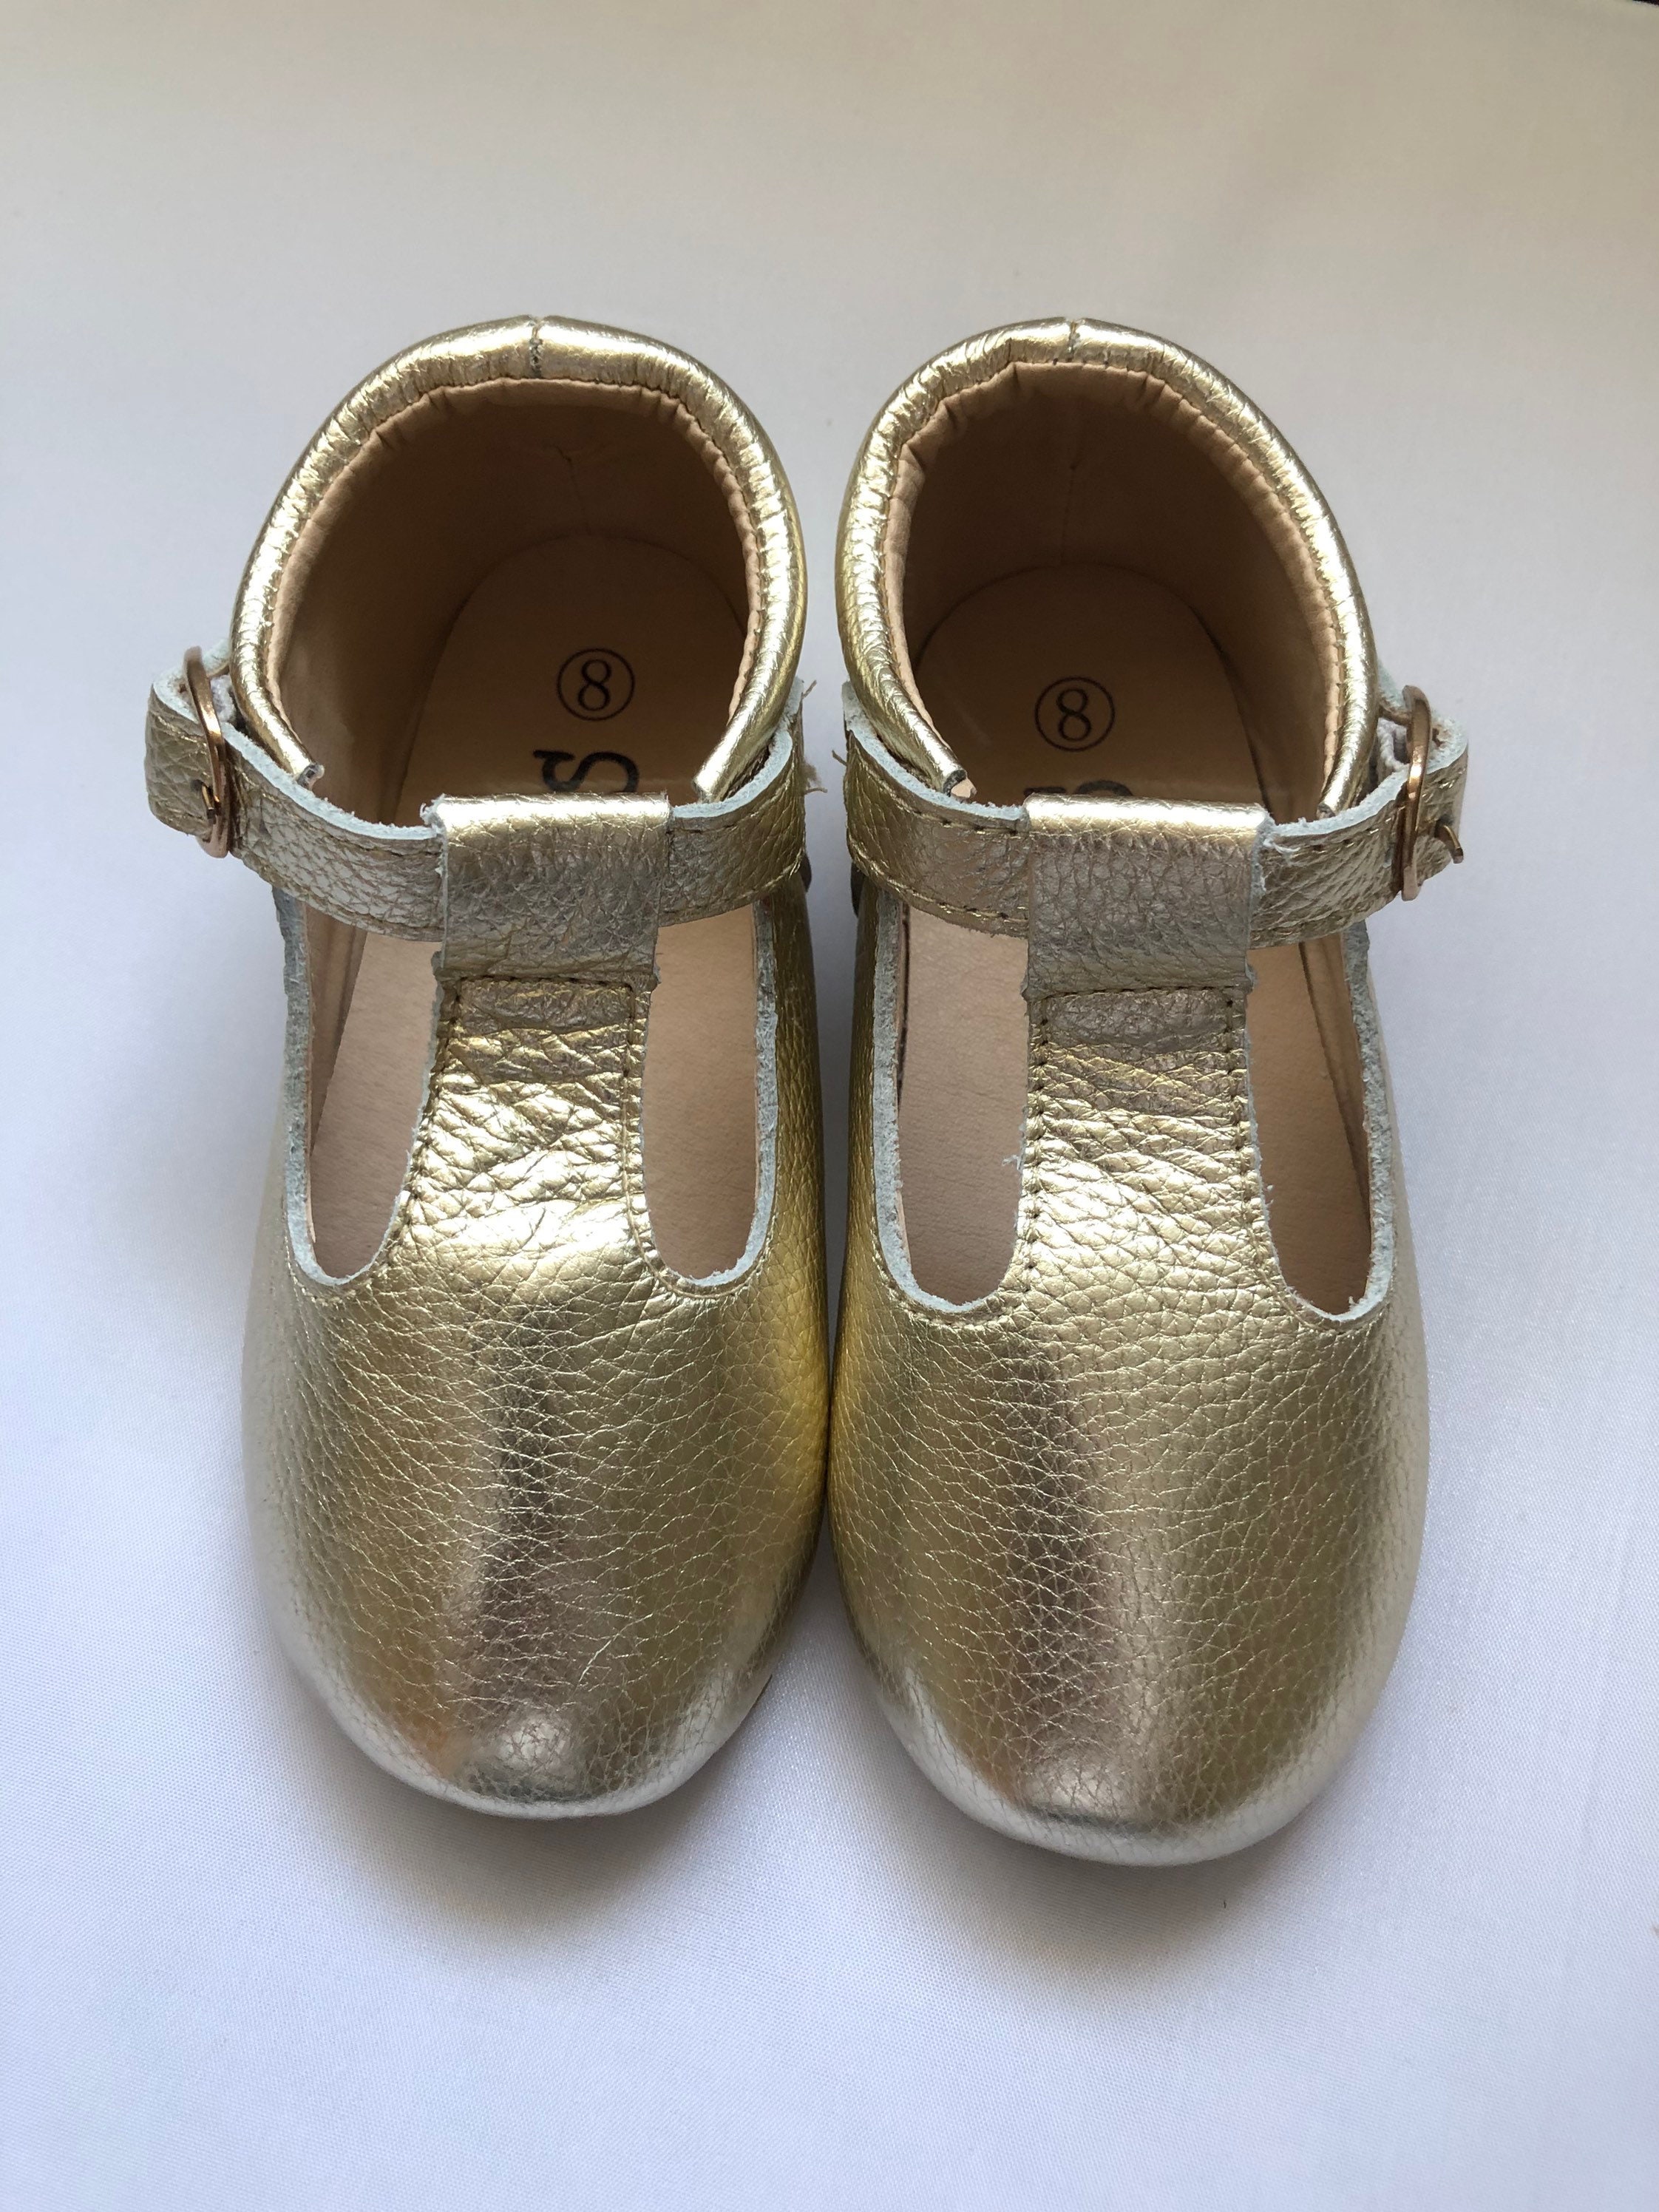 Special Sale! SIZE 8 Hard-Sole Mary Janes - Gold, Toddler Tbar Shoes ...